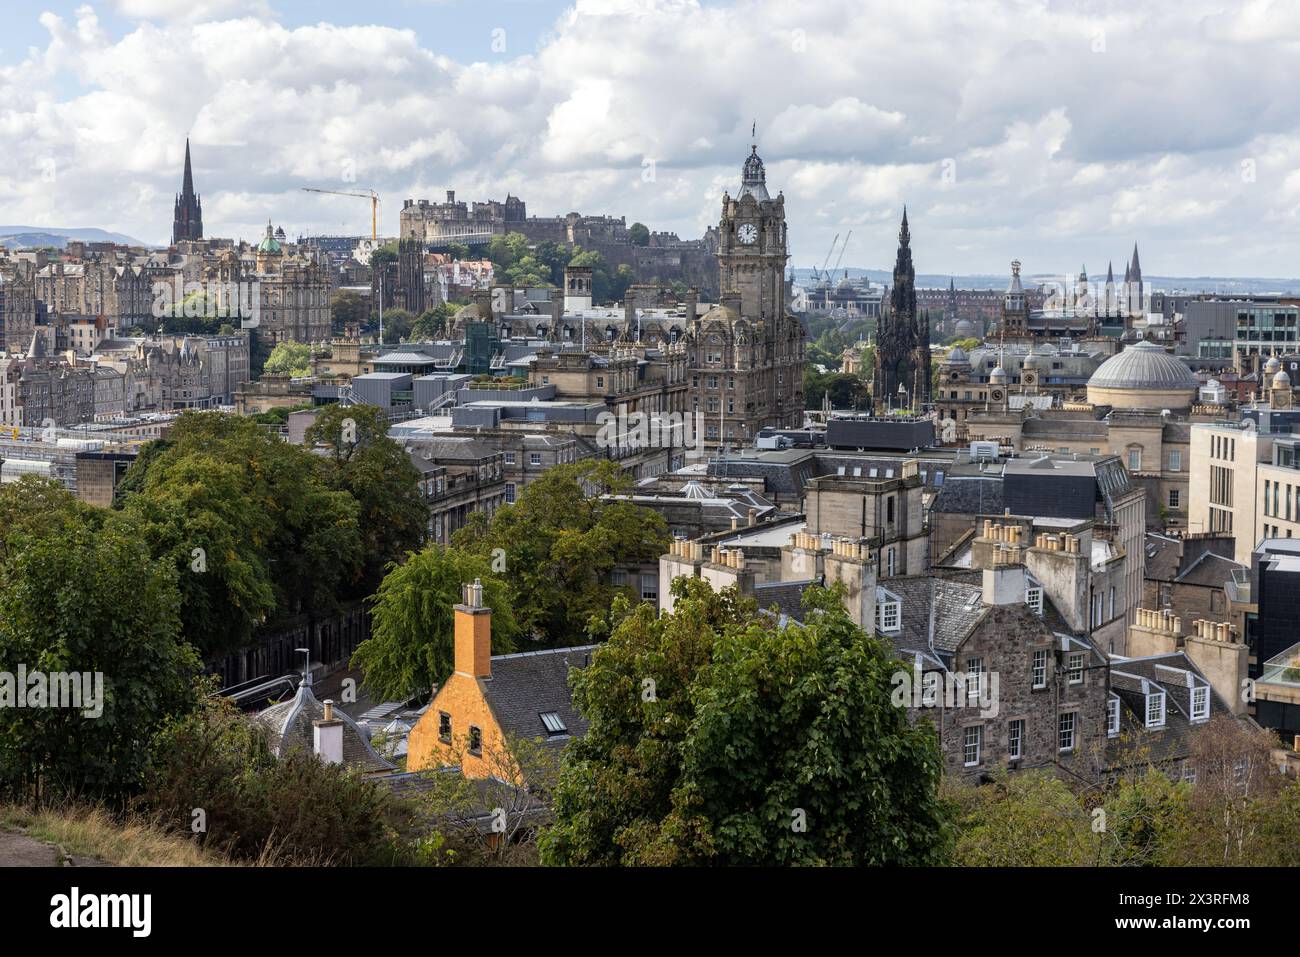 The centre of Edinburgh, with the Balmoral Hotel and Scott Monument prominent on Princes Street, and the castle on the skyline Stock Photo